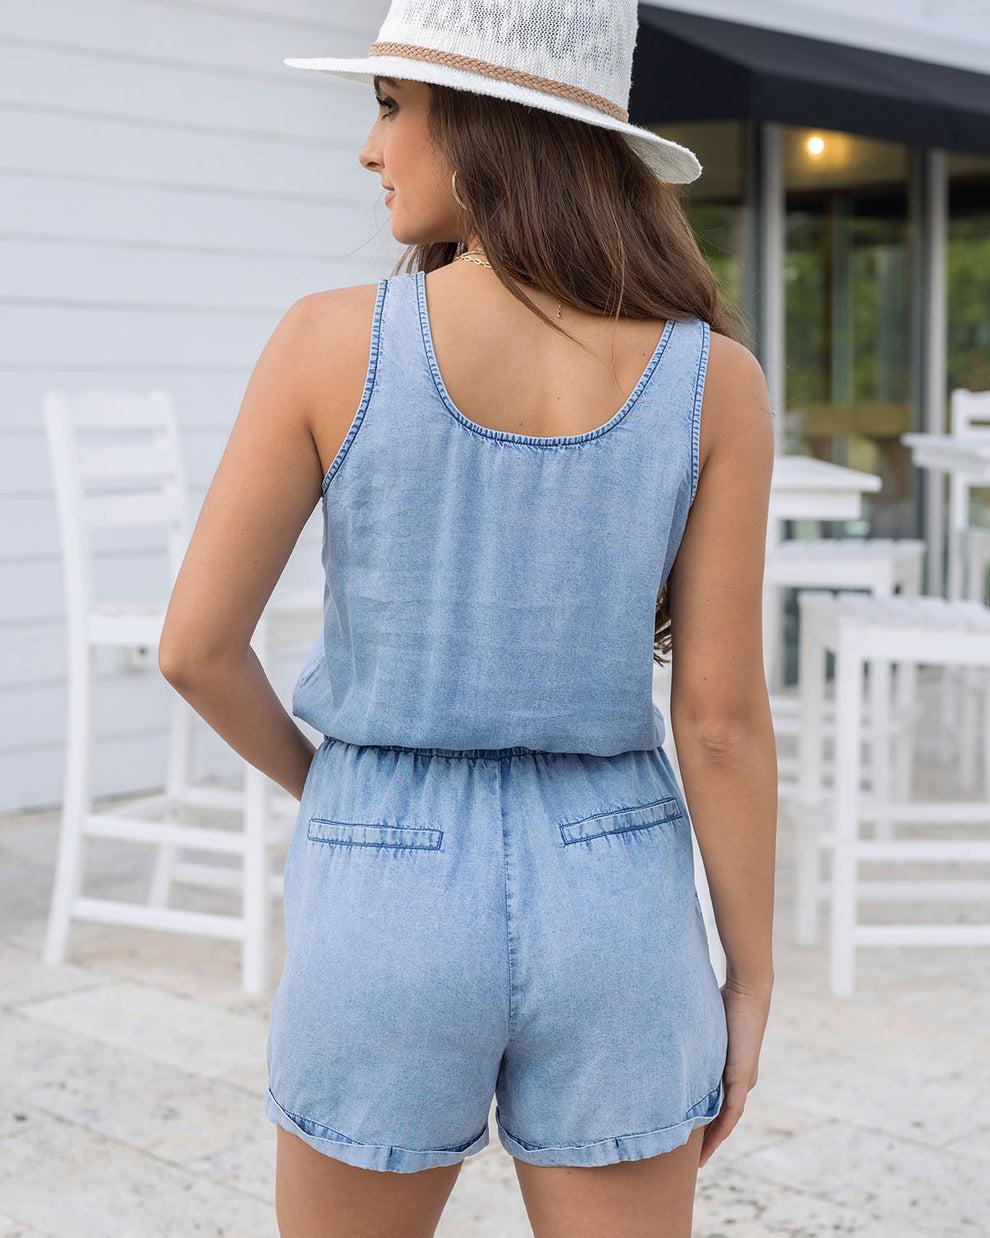 Grace & Lace Tencell Lyocell Chambray Romper - Light Wash